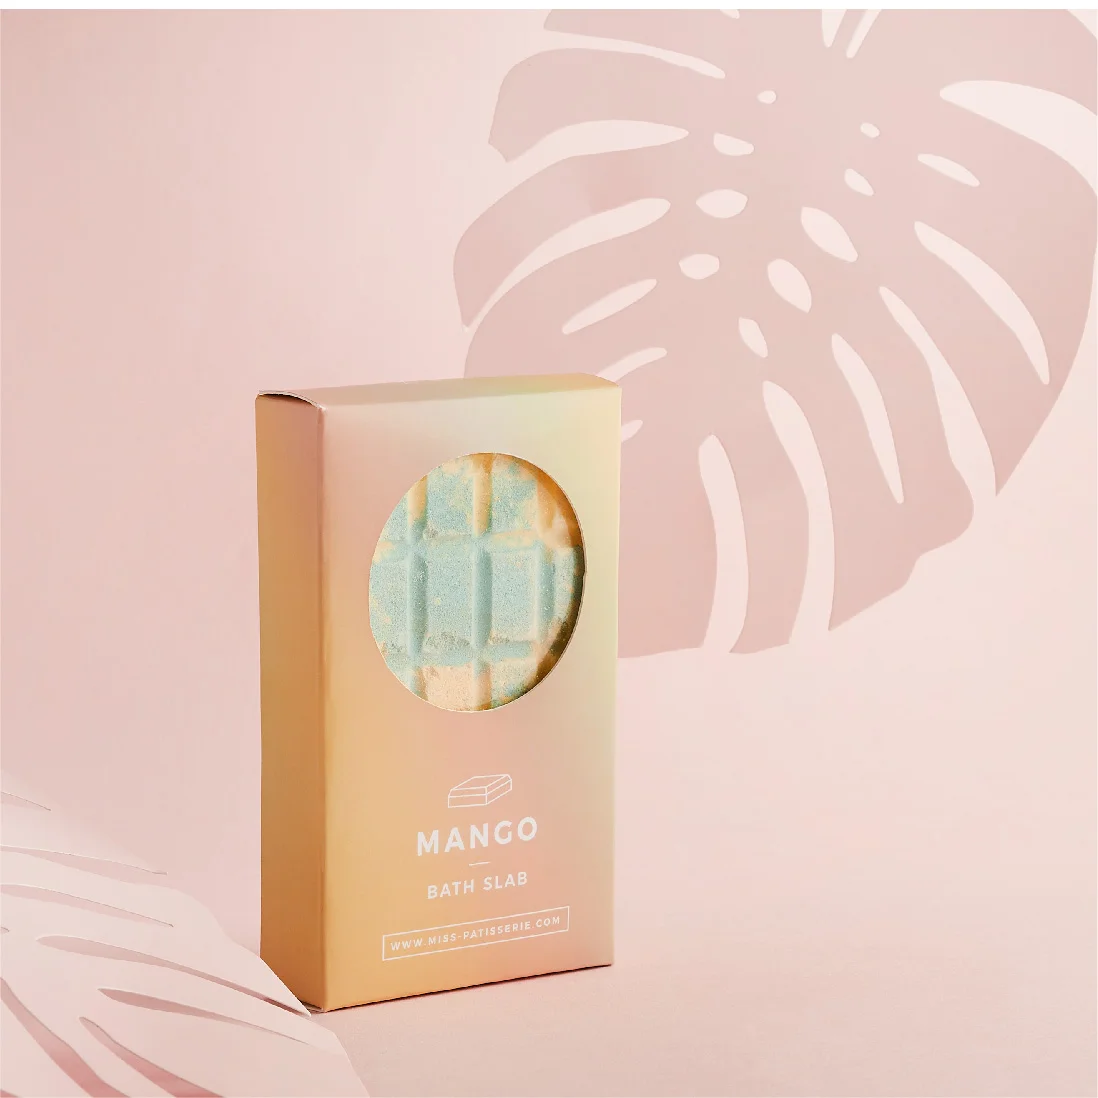 A mango-scented bath slab in a gold packaging with a circular window revealing the product, set against a soft pink background with a white monstera leaf silhouette, designed by a top design agency